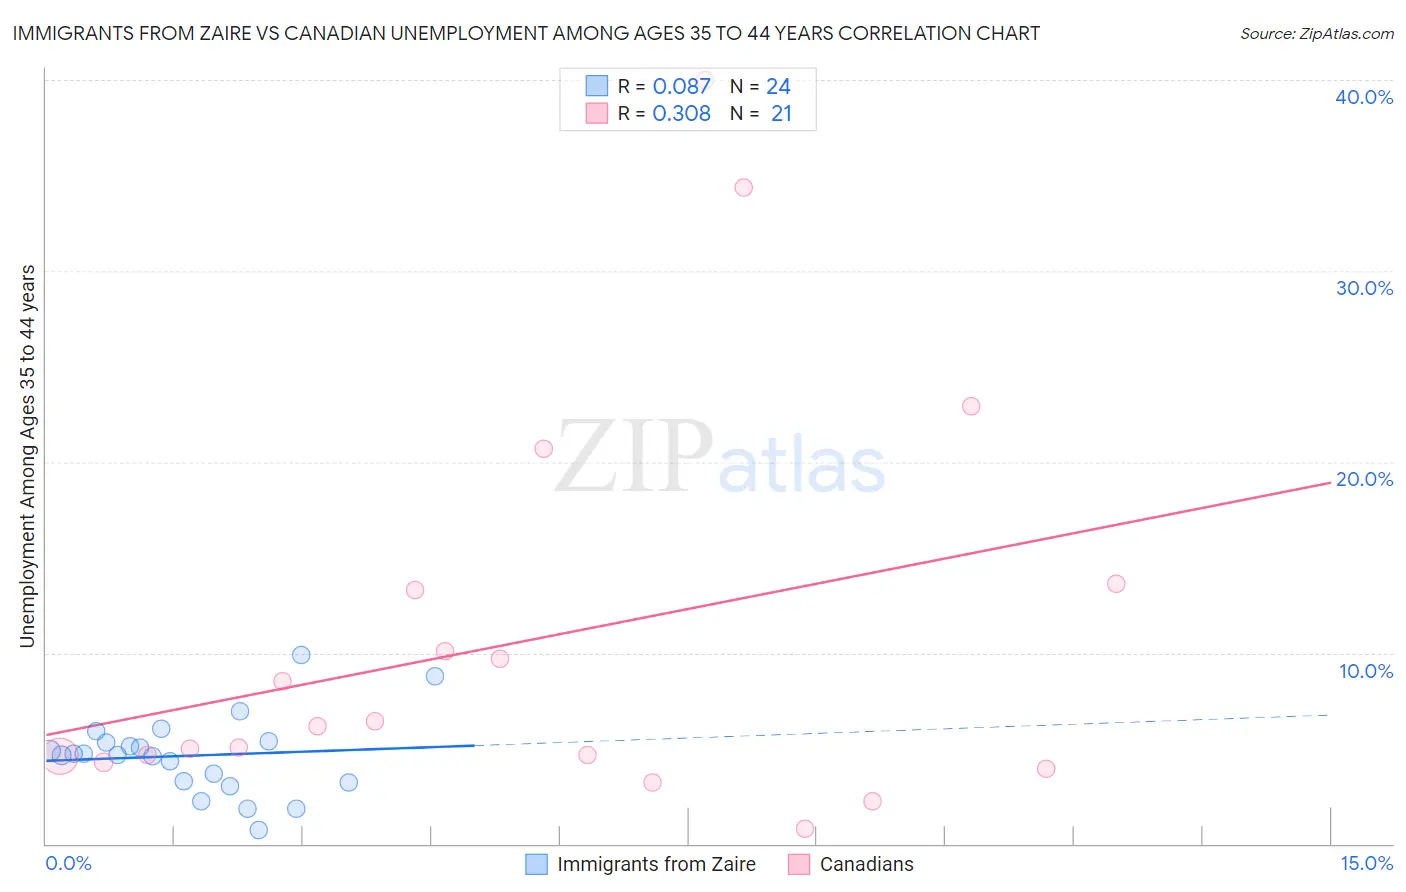 Immigrants from Zaire vs Canadian Unemployment Among Ages 35 to 44 years